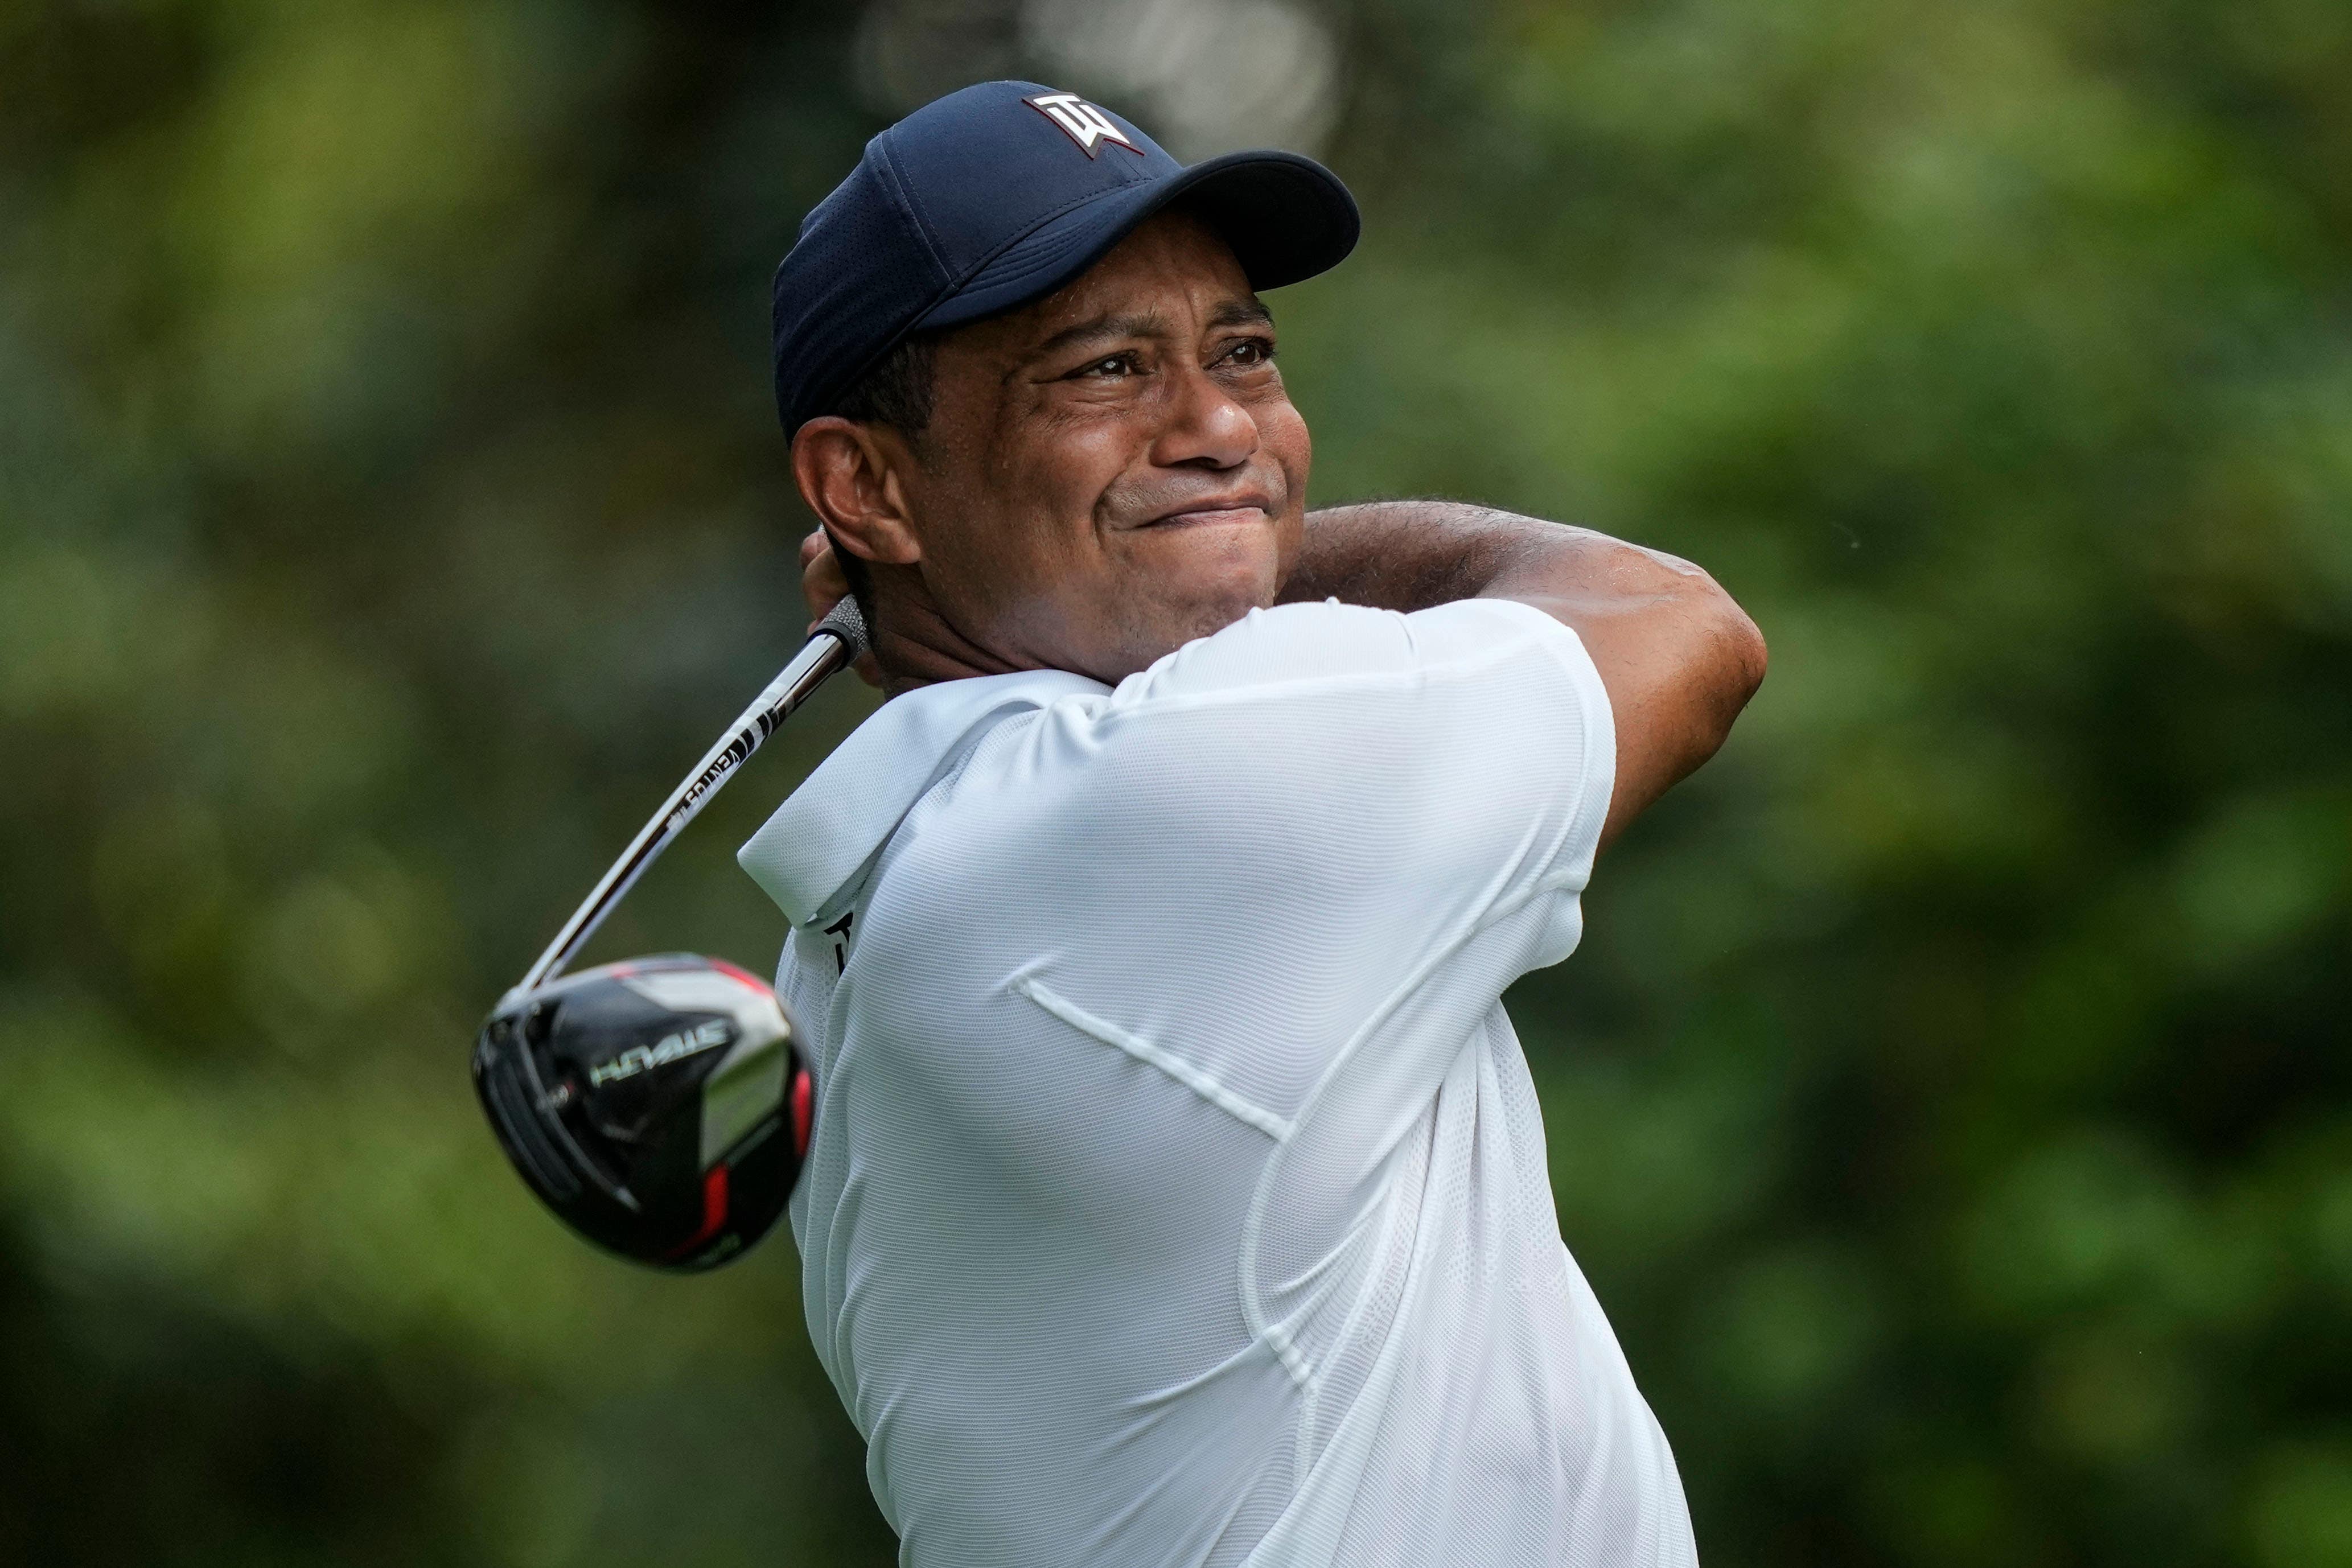 Tiger Woods struggled to a 74 in the first round of the 87th Masters